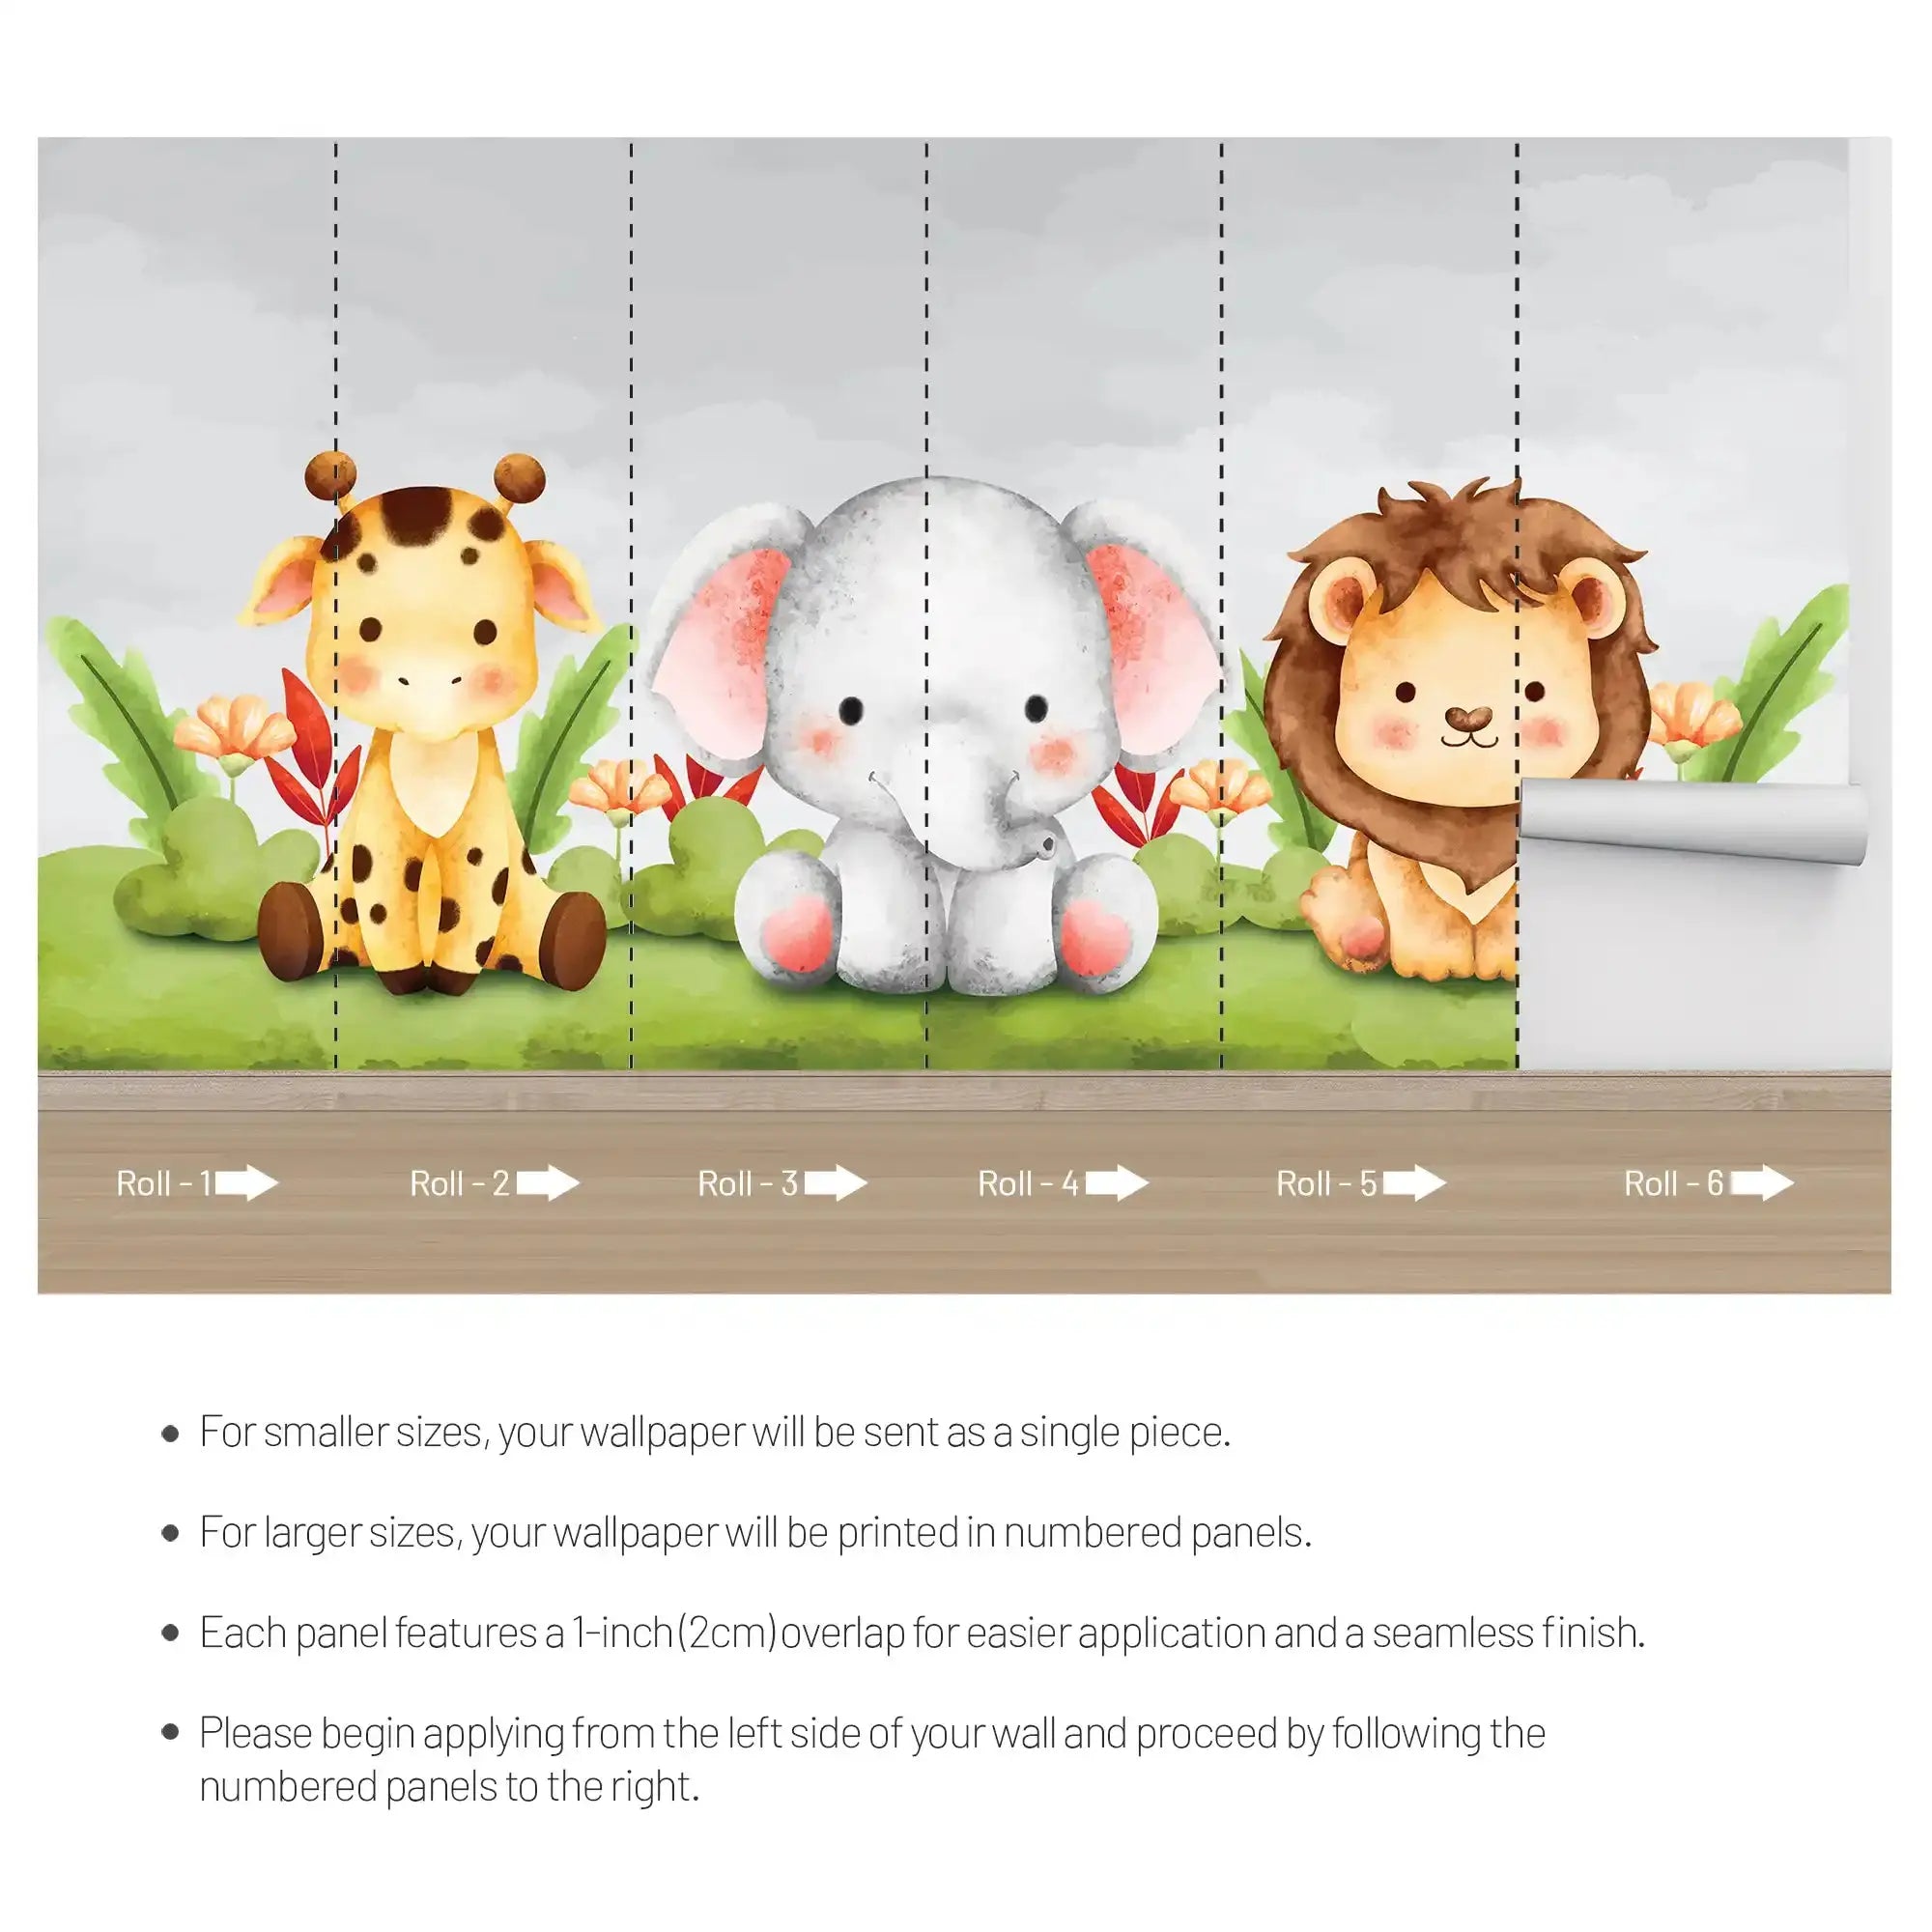 6007 / Playroom Decor with Pastel Animal Wall Mural - Easy Peel and Stick, Temporary Wallpaper - Artevella